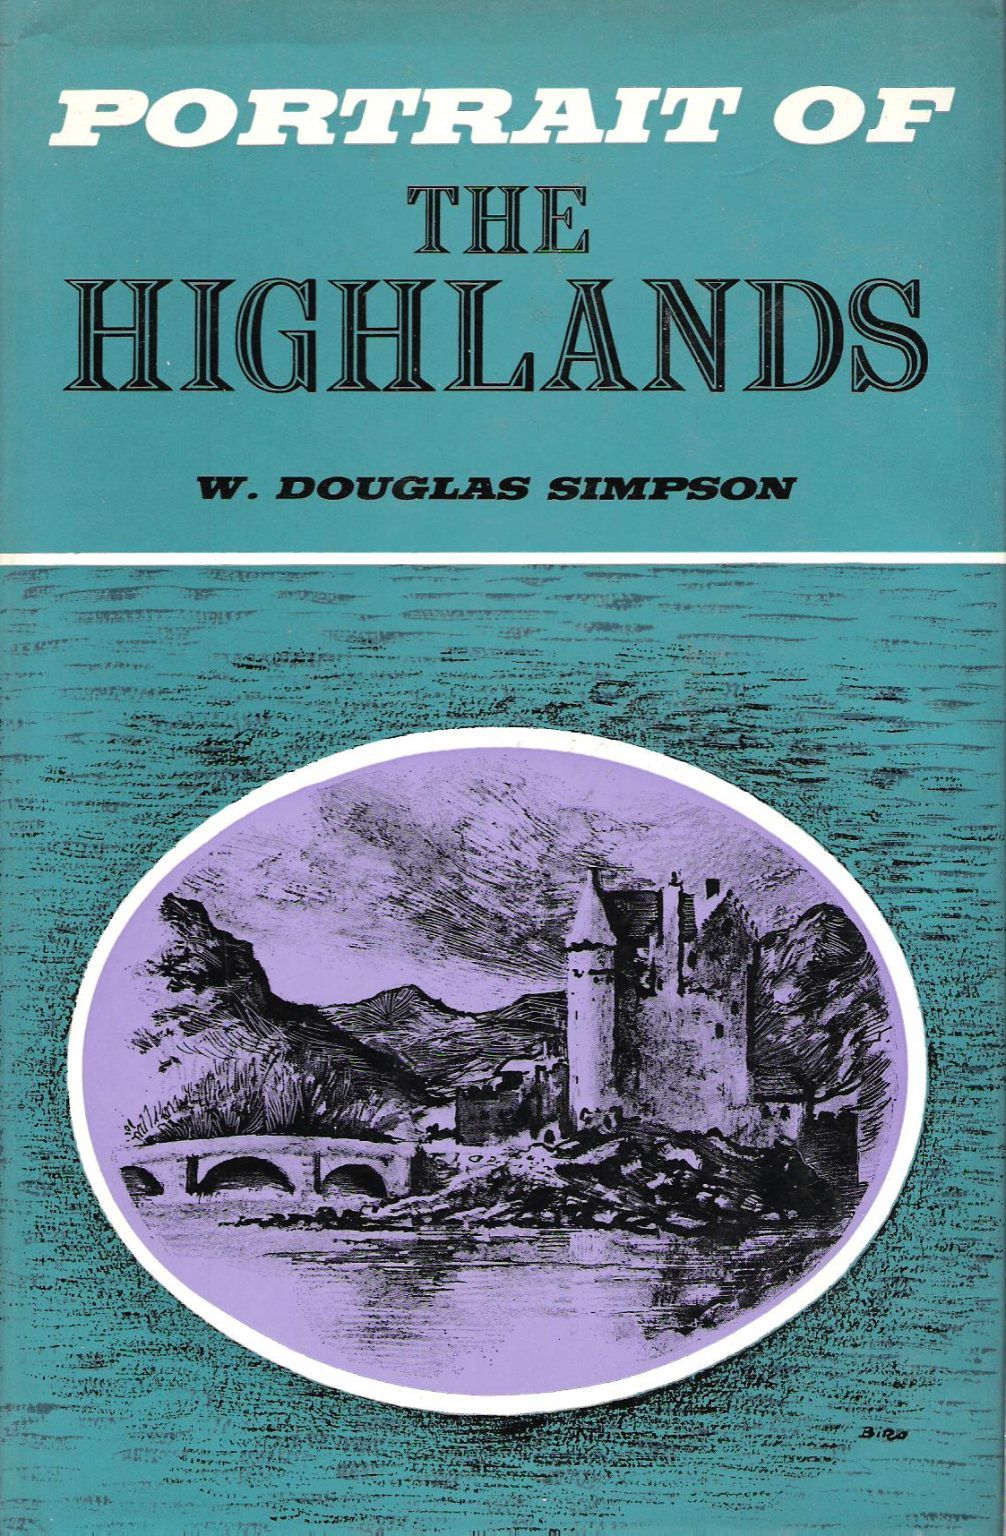 PORTRAIT OF THE HIGHLANDS